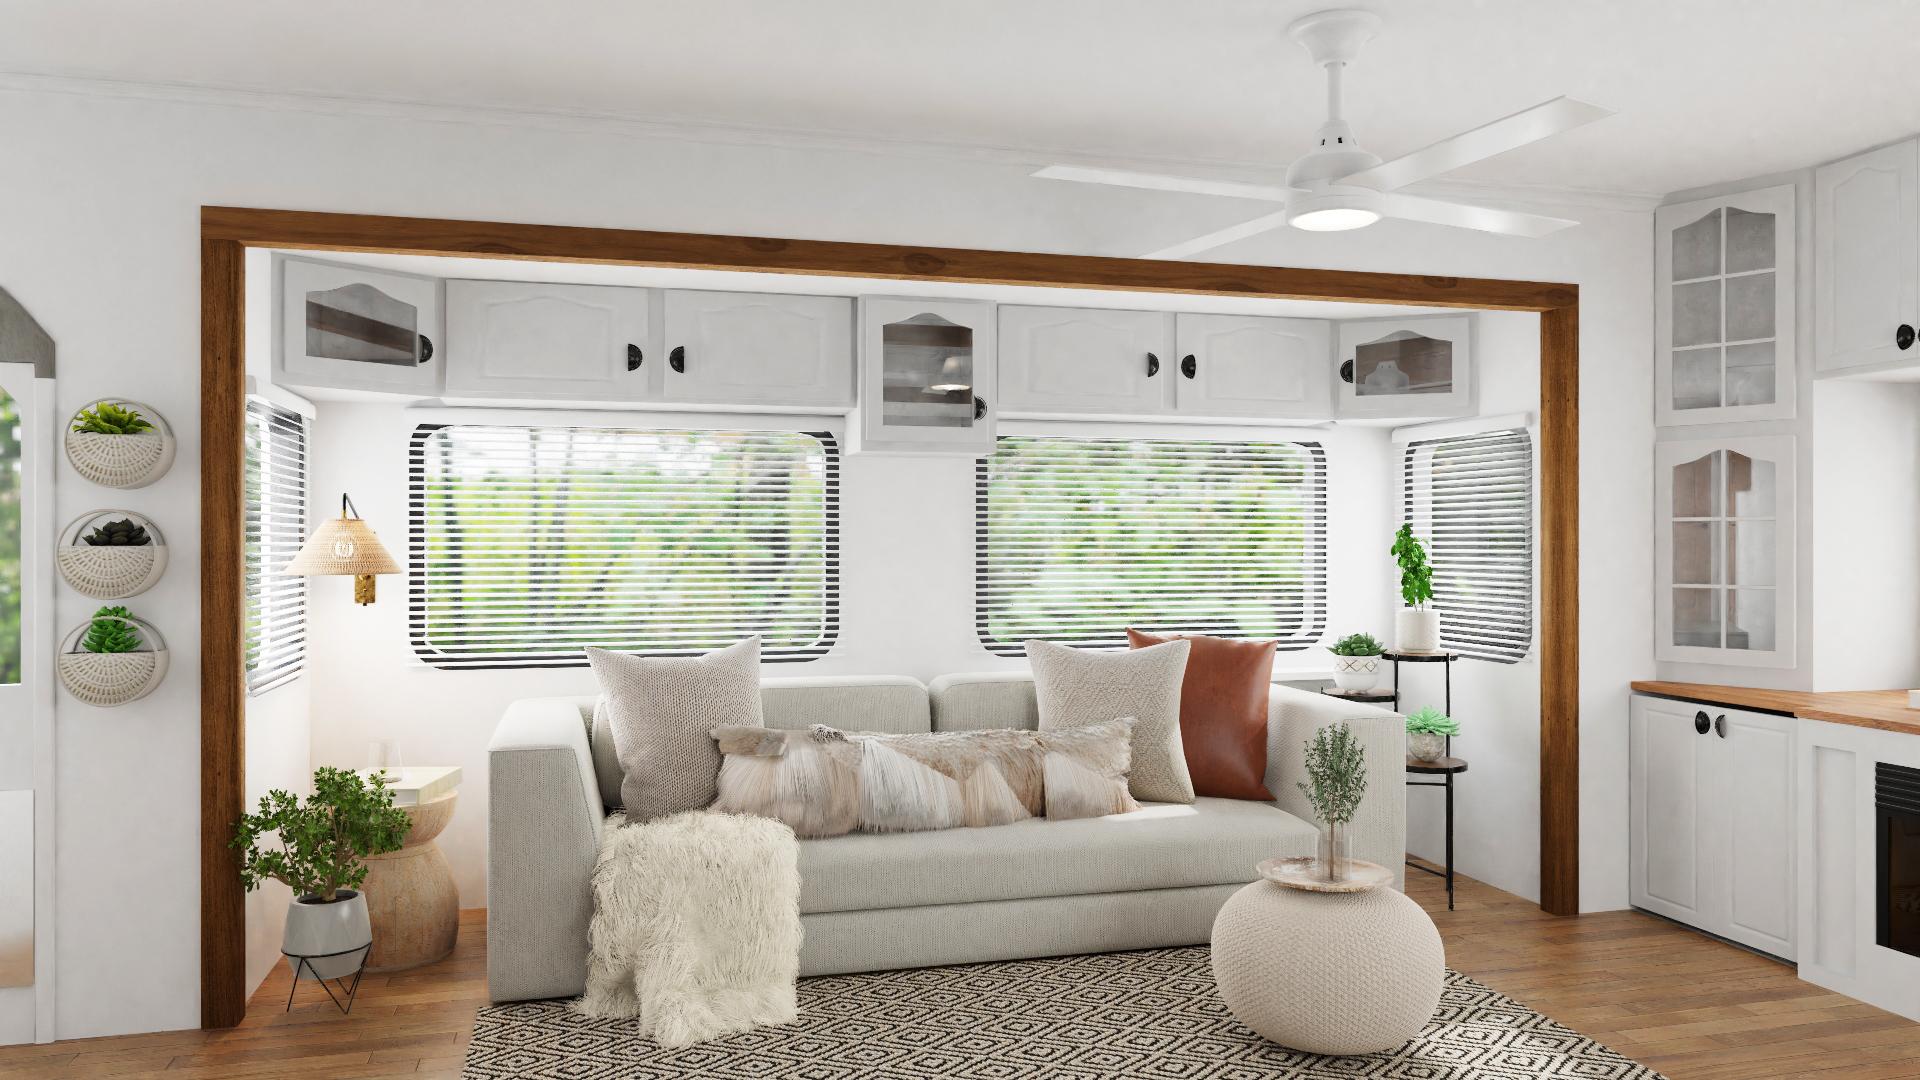 For The Love Of Fur: An RV With Bohemian Accents 